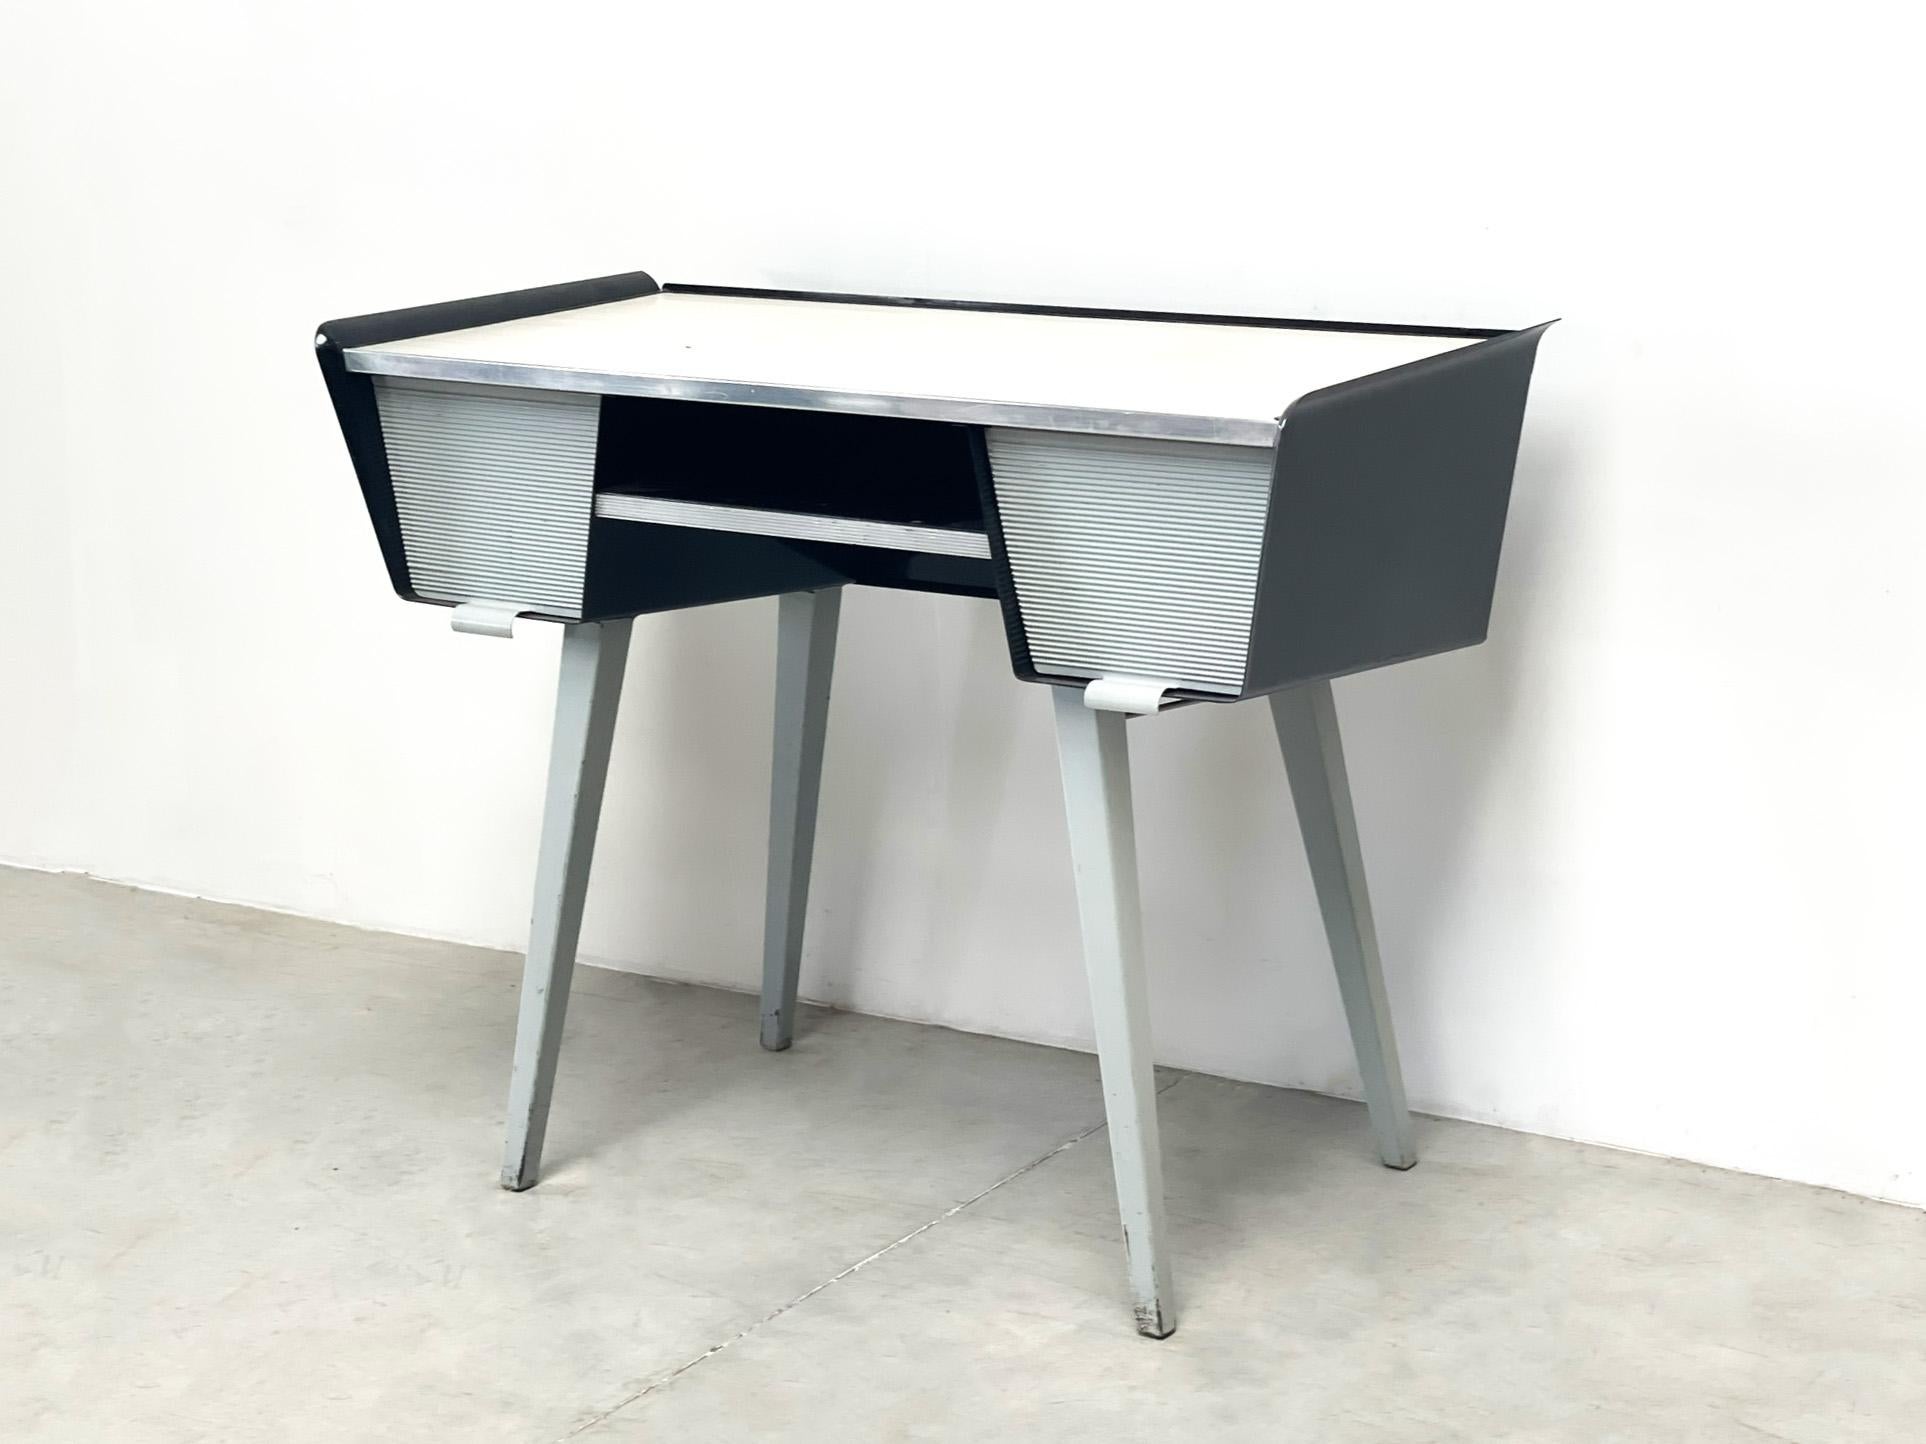 This nice desk is probably from the 1950s from France. This type of industrial furniture is typified by its industrial but elegant look. Someone who was very good at this was Jean Prouve. Jean Prouve is one of the most famous French designers of